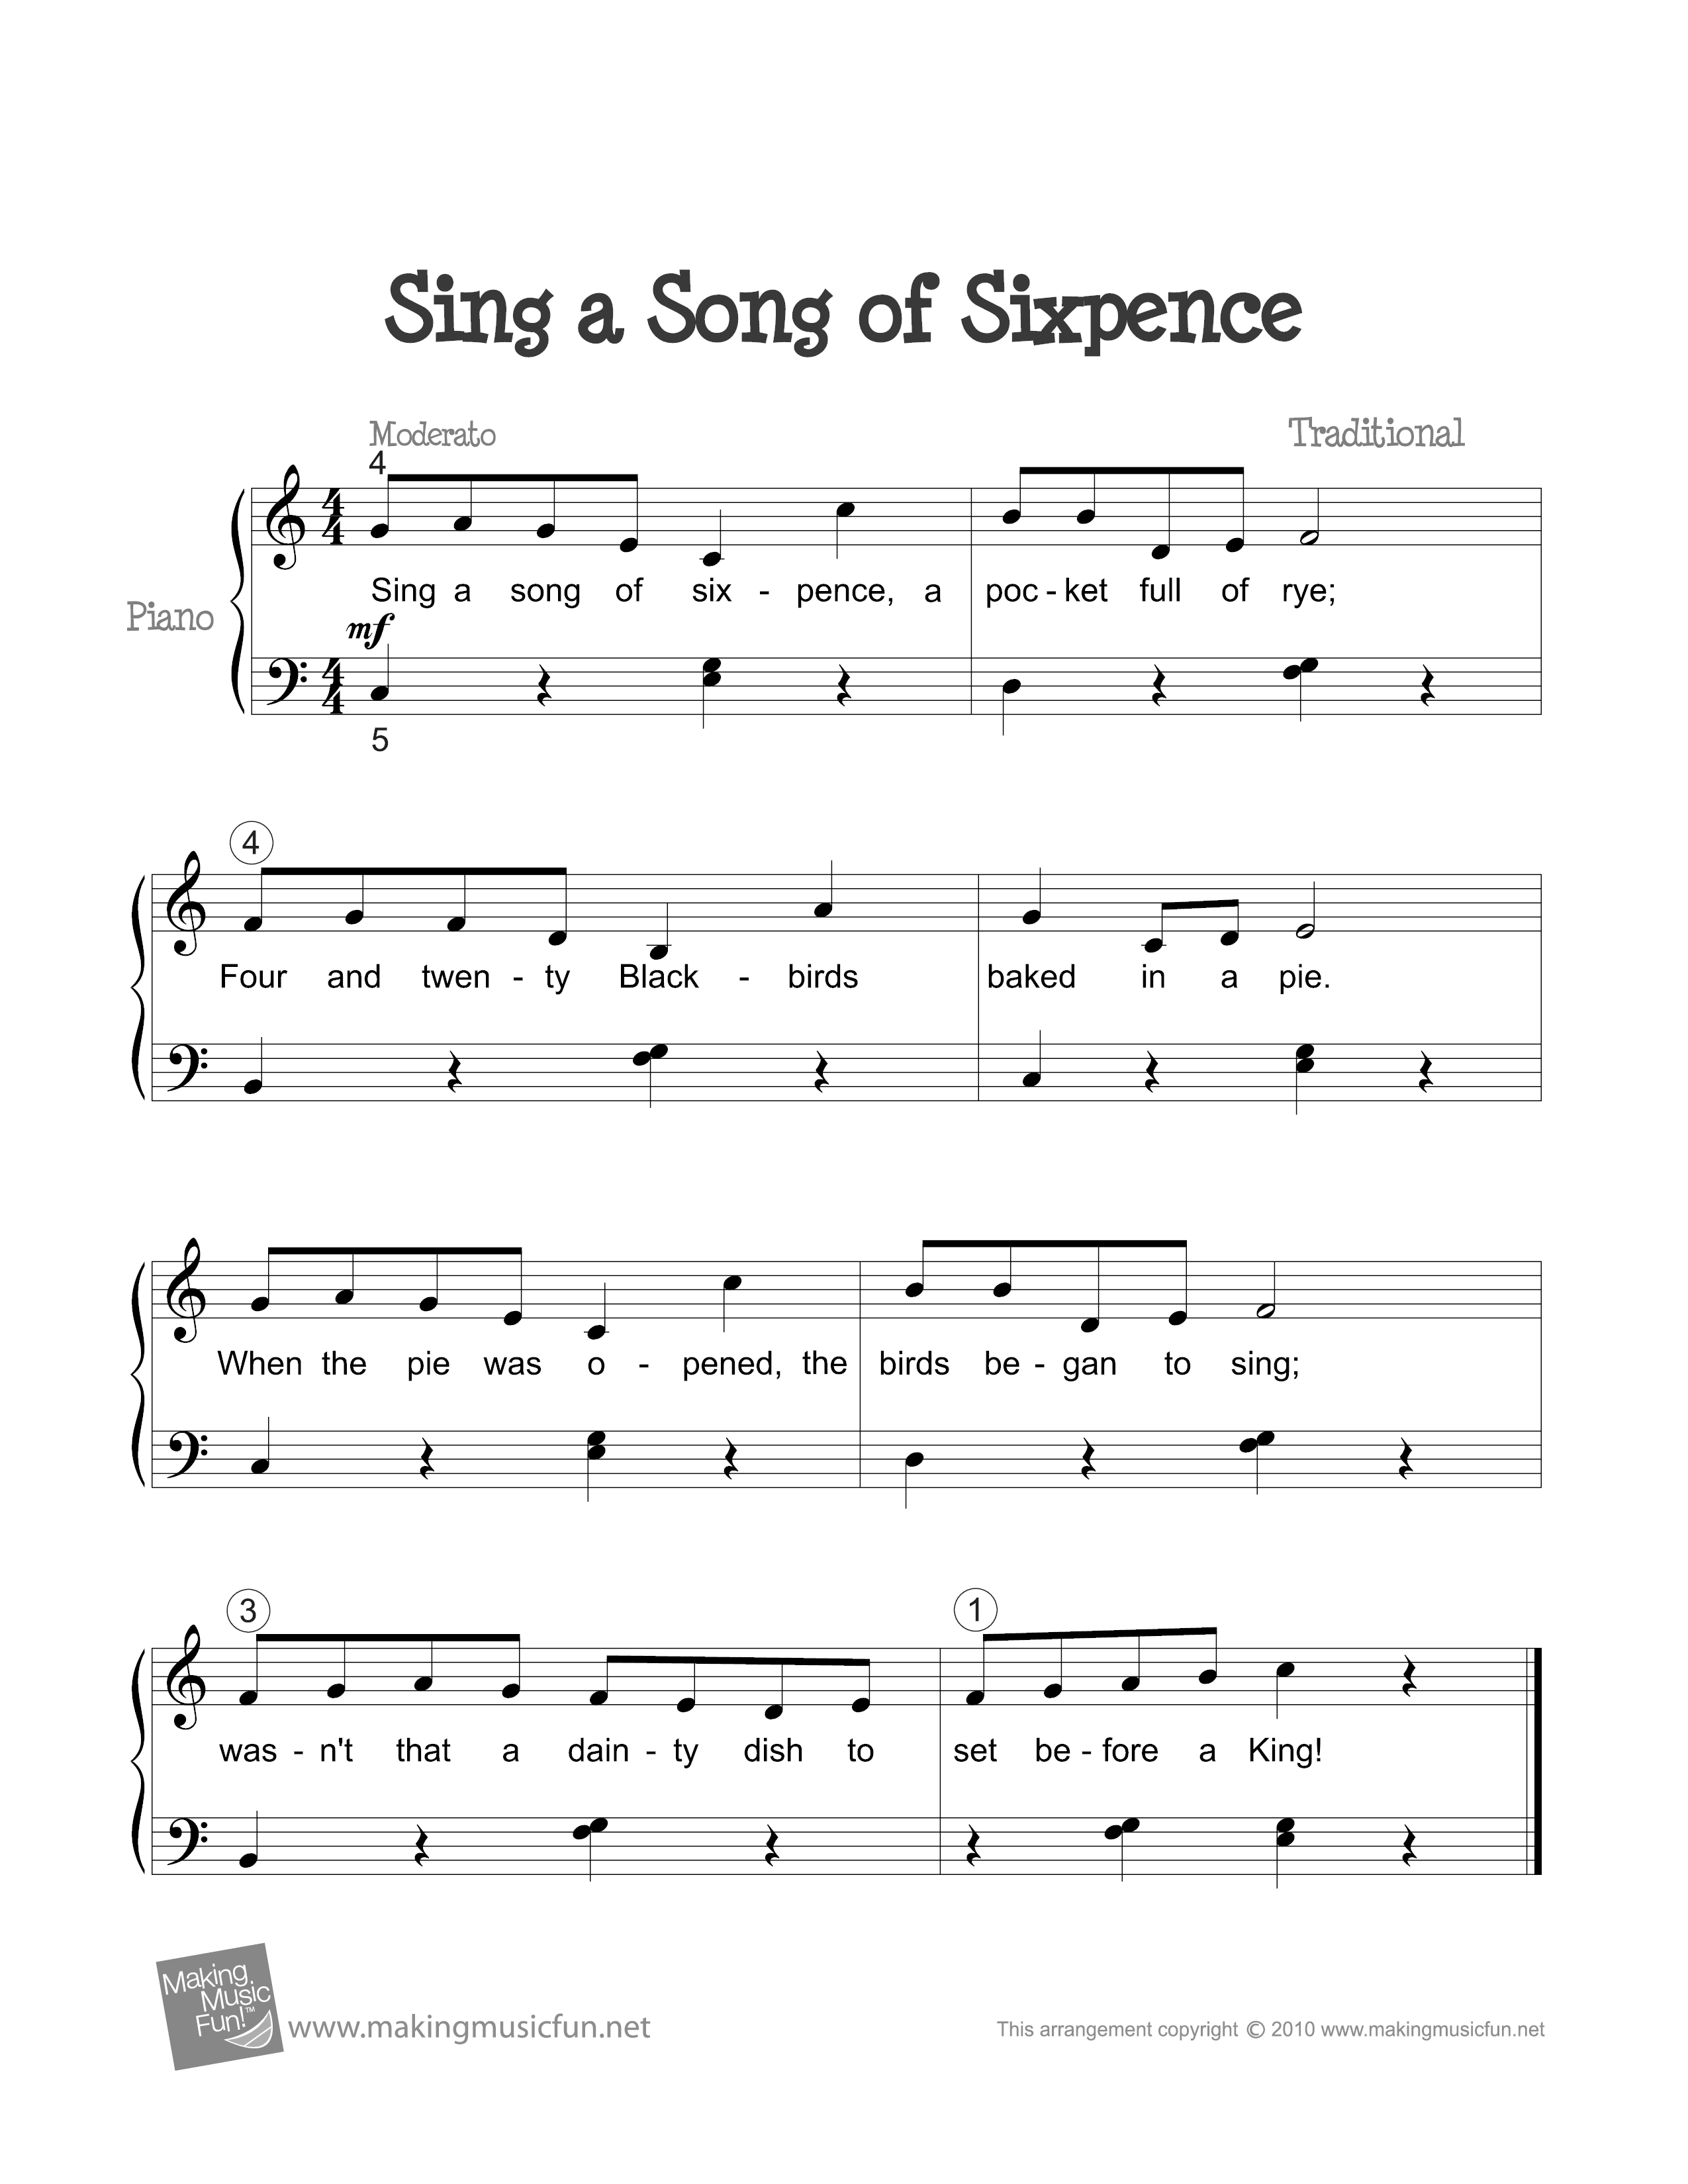 Sing a Song of Sixpence琴谱